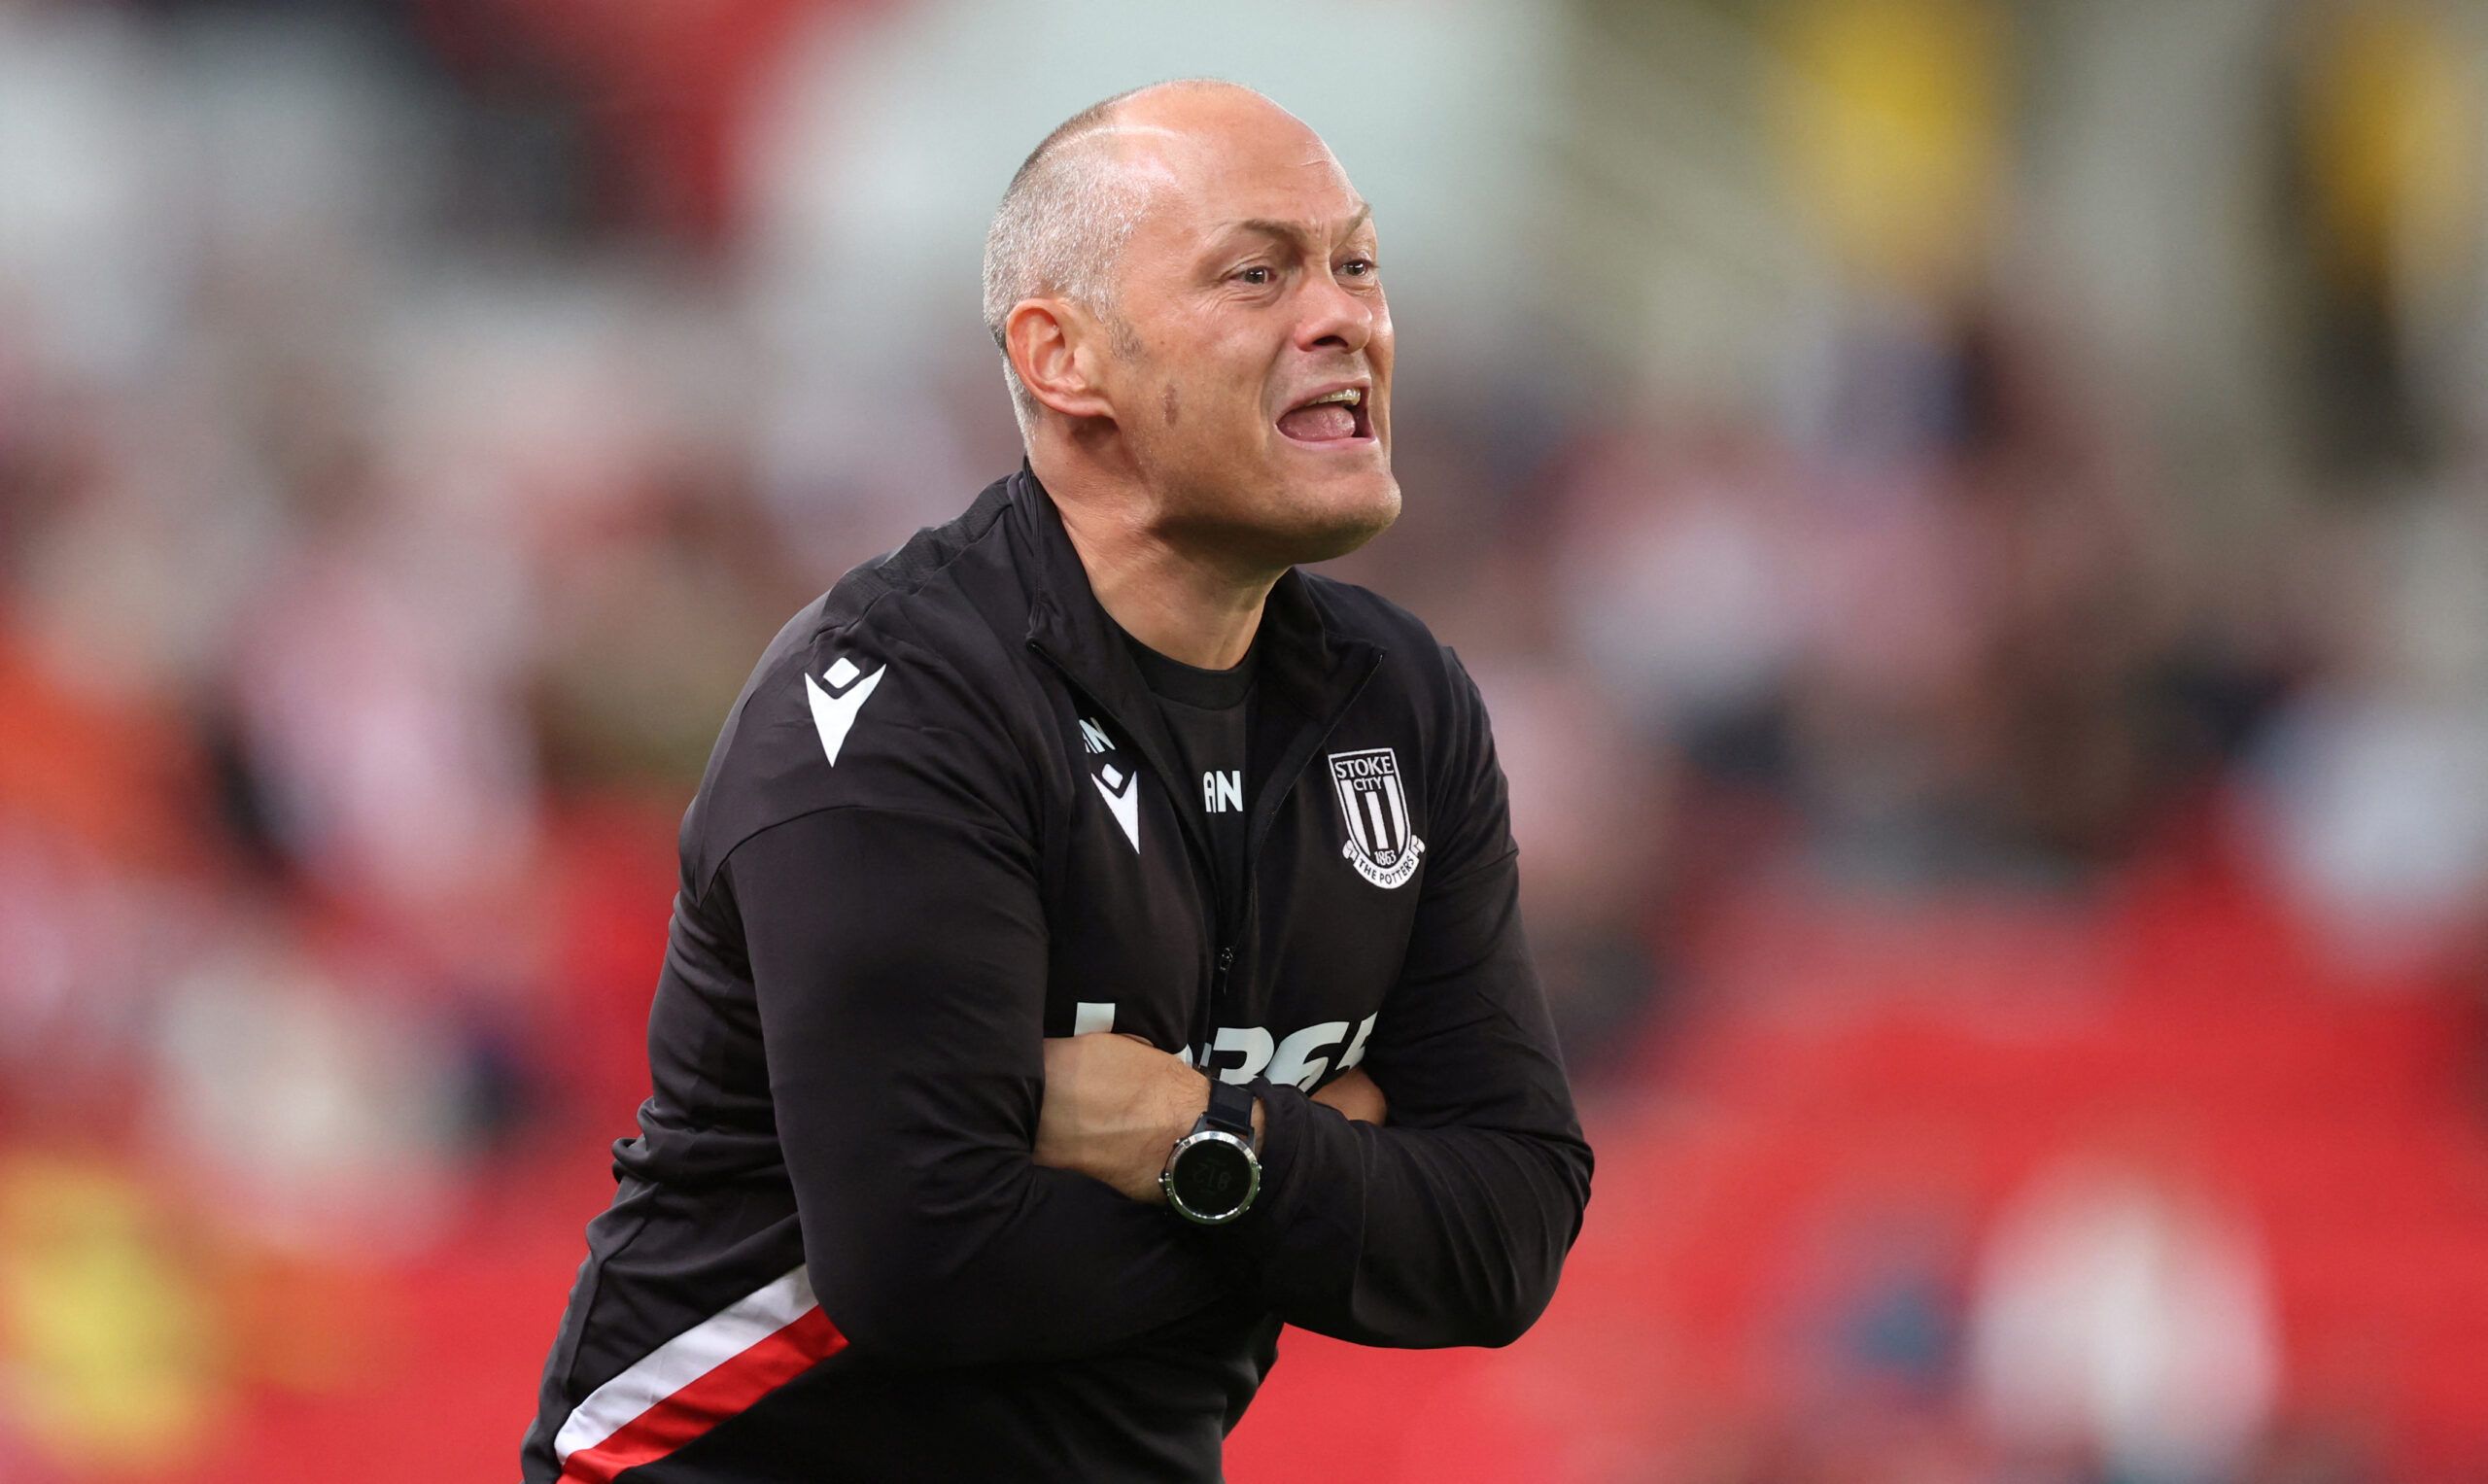 Soccer Football - Championship - Stoke City v Swansea City - bet365 Stadium, Stoke-on-Trent, Britain - August 31, 2022 Stoke City manager Alex Neil reacts  Action Images/Carl Recine  EDITORIAL USE ONLY. No use with unauthorized audio, video, data, fixture lists, club/league logos or 